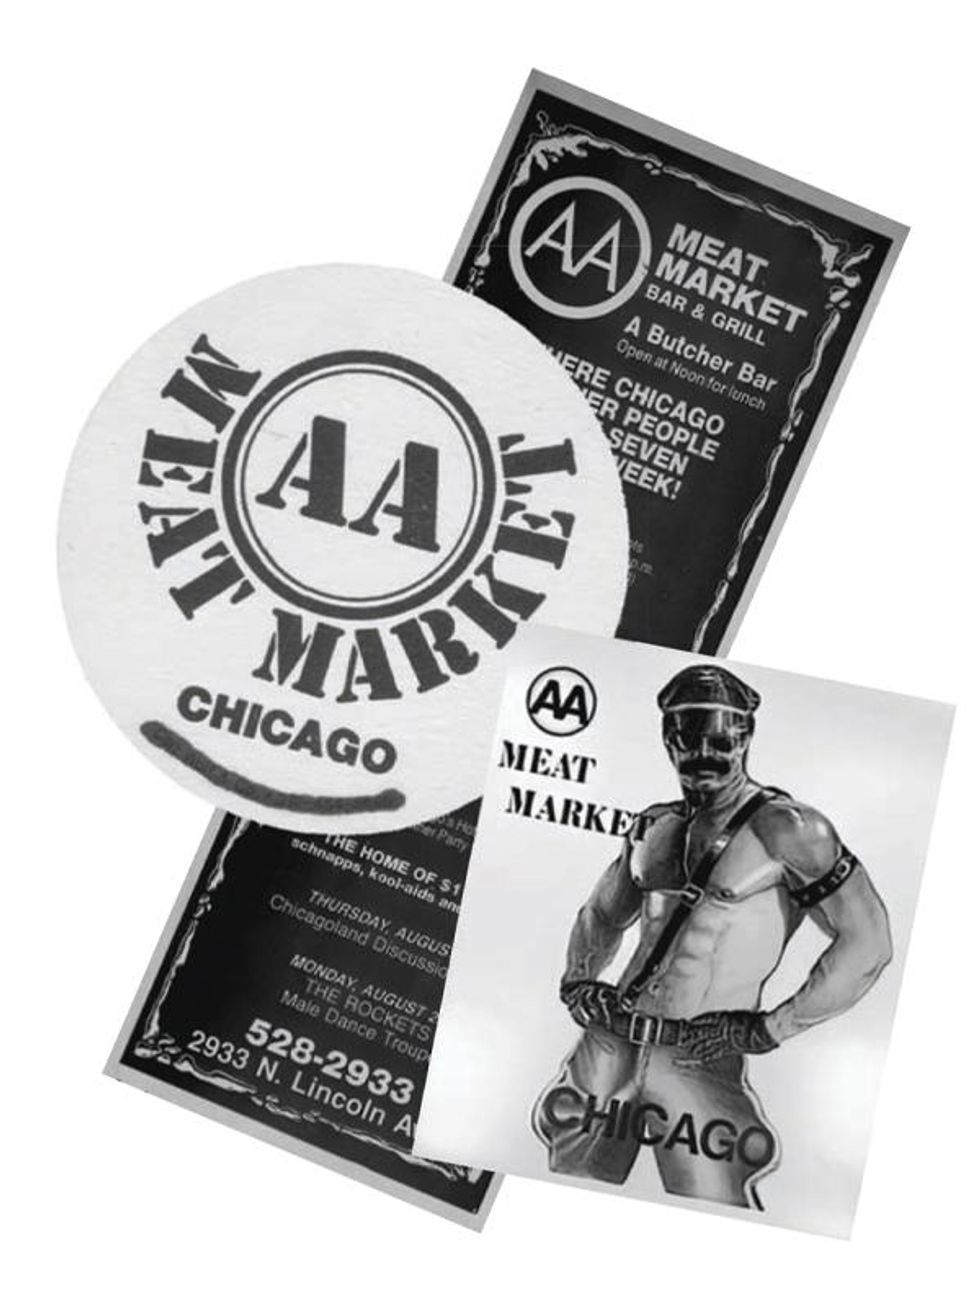 Ads from Meat Market gay bar in Chicago